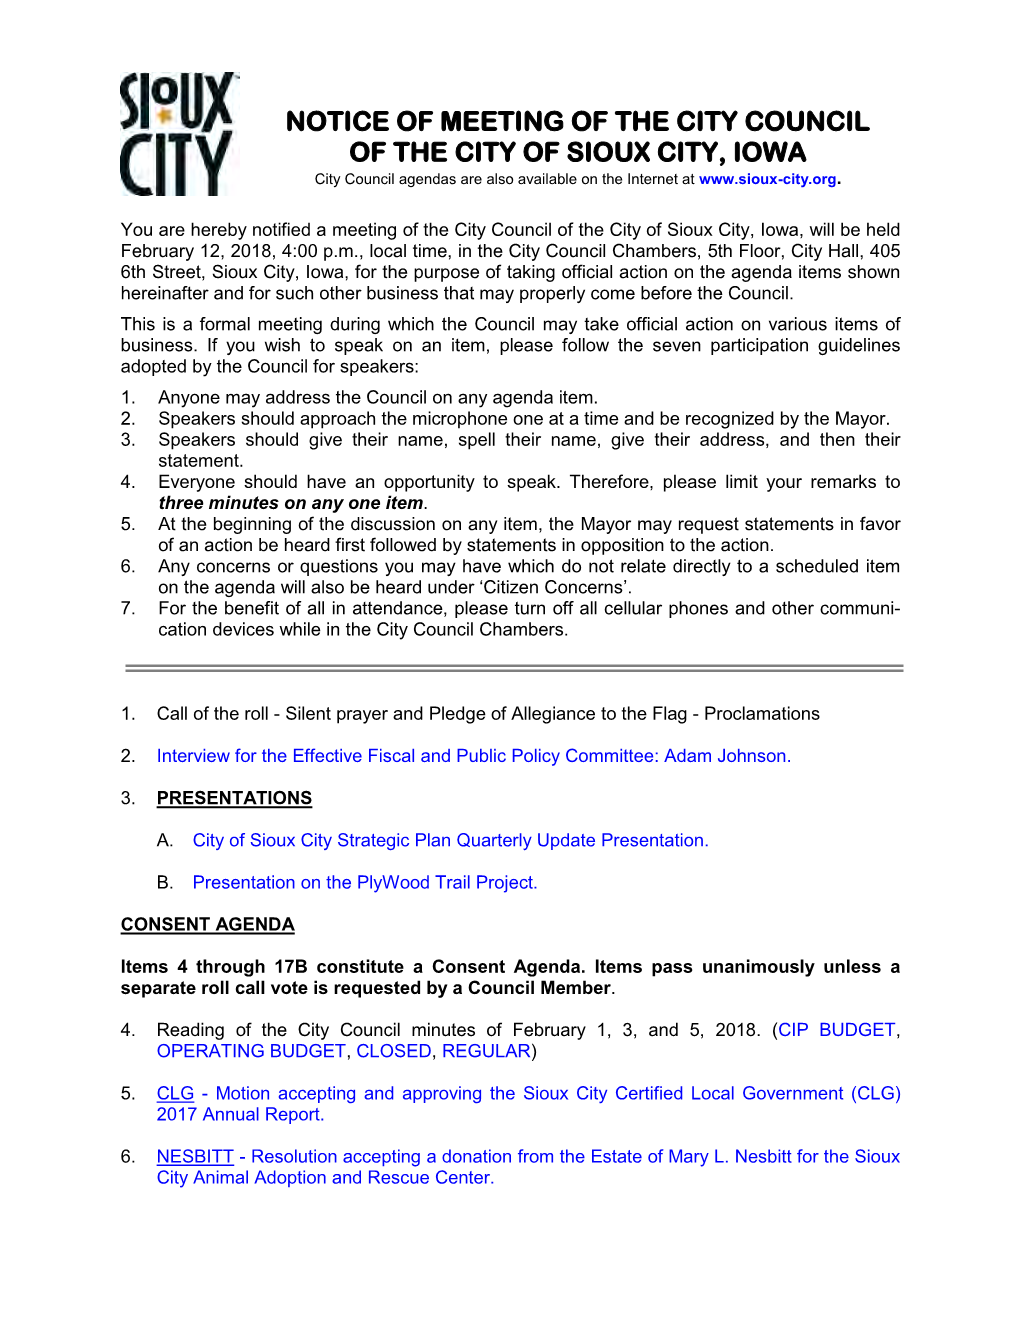 NOTICE of MEETING of the CITY COUNCIL of the CITY of SIOUX CITY, IOWA City Council Agendas Are Also Available on the Internet At